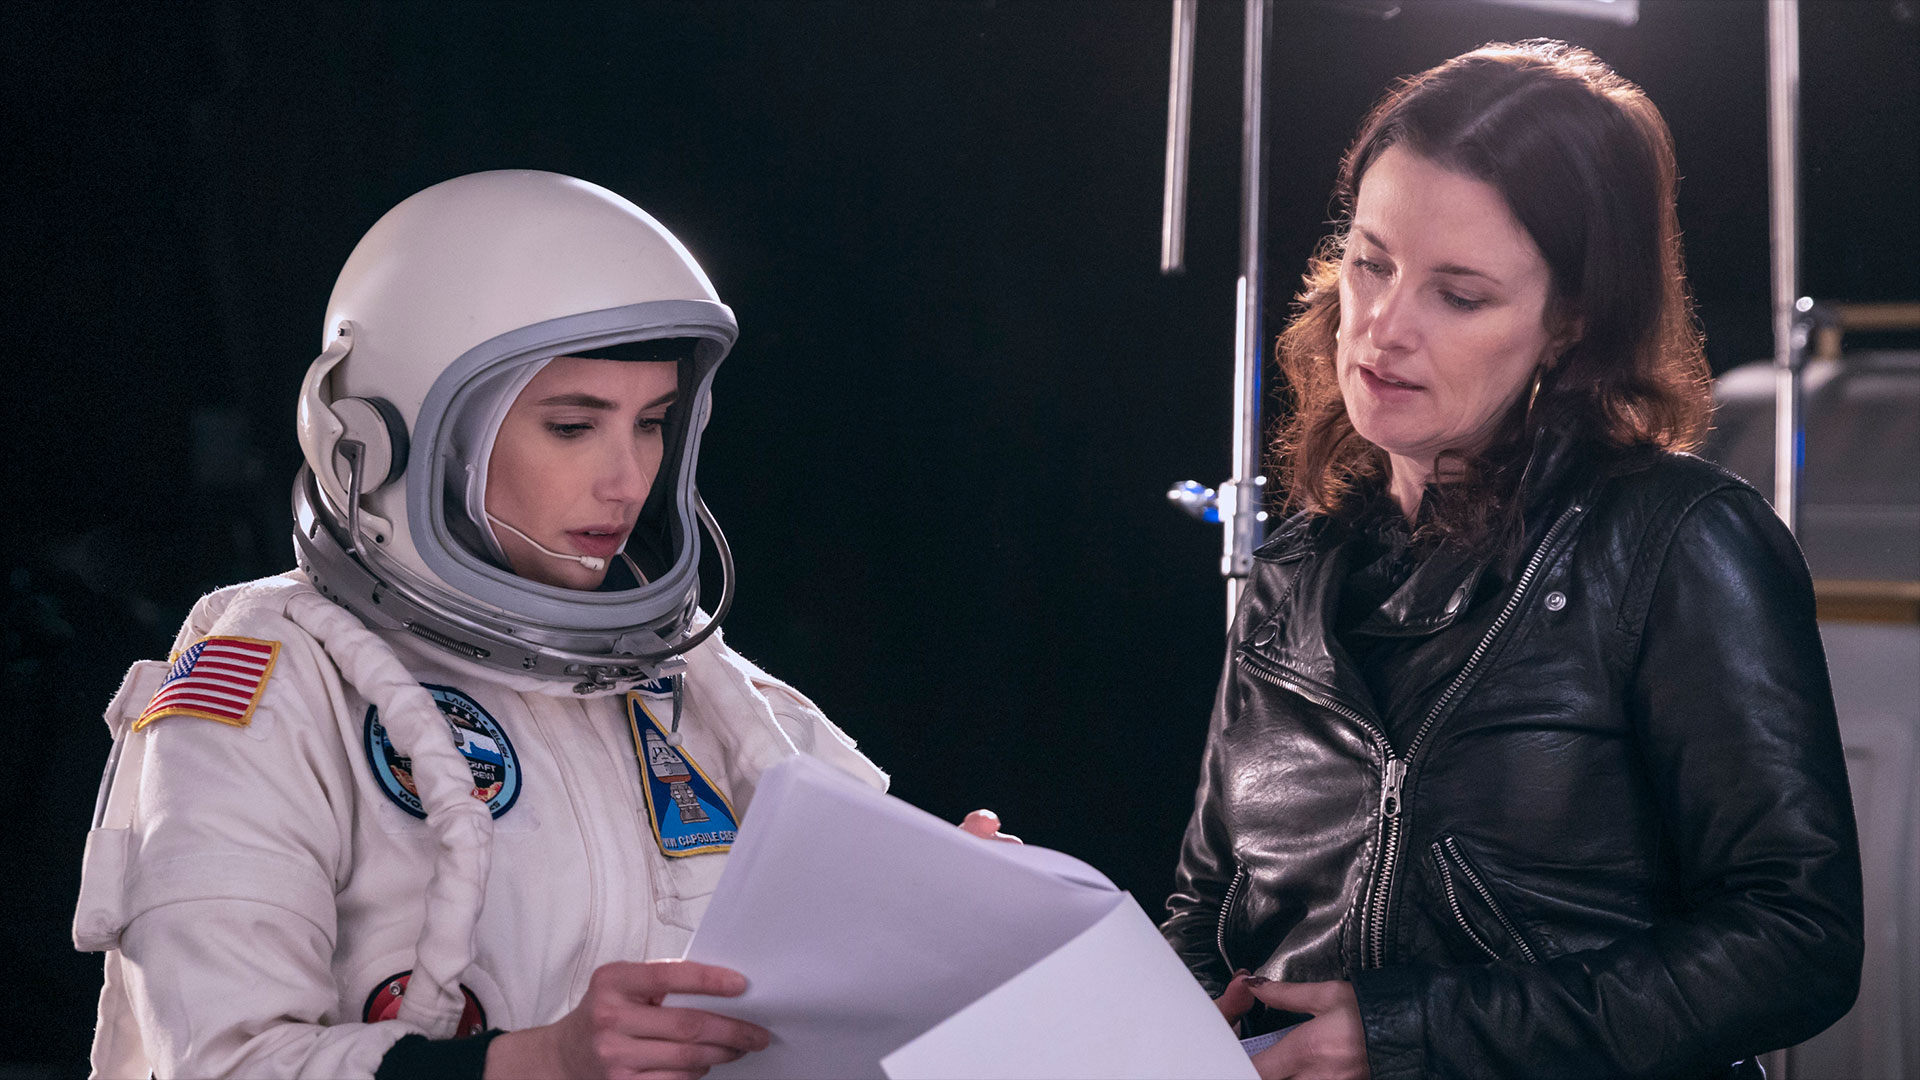 ‘Space Cadet’ applies humor to NASA astronaut selection, says film director (interview) Space